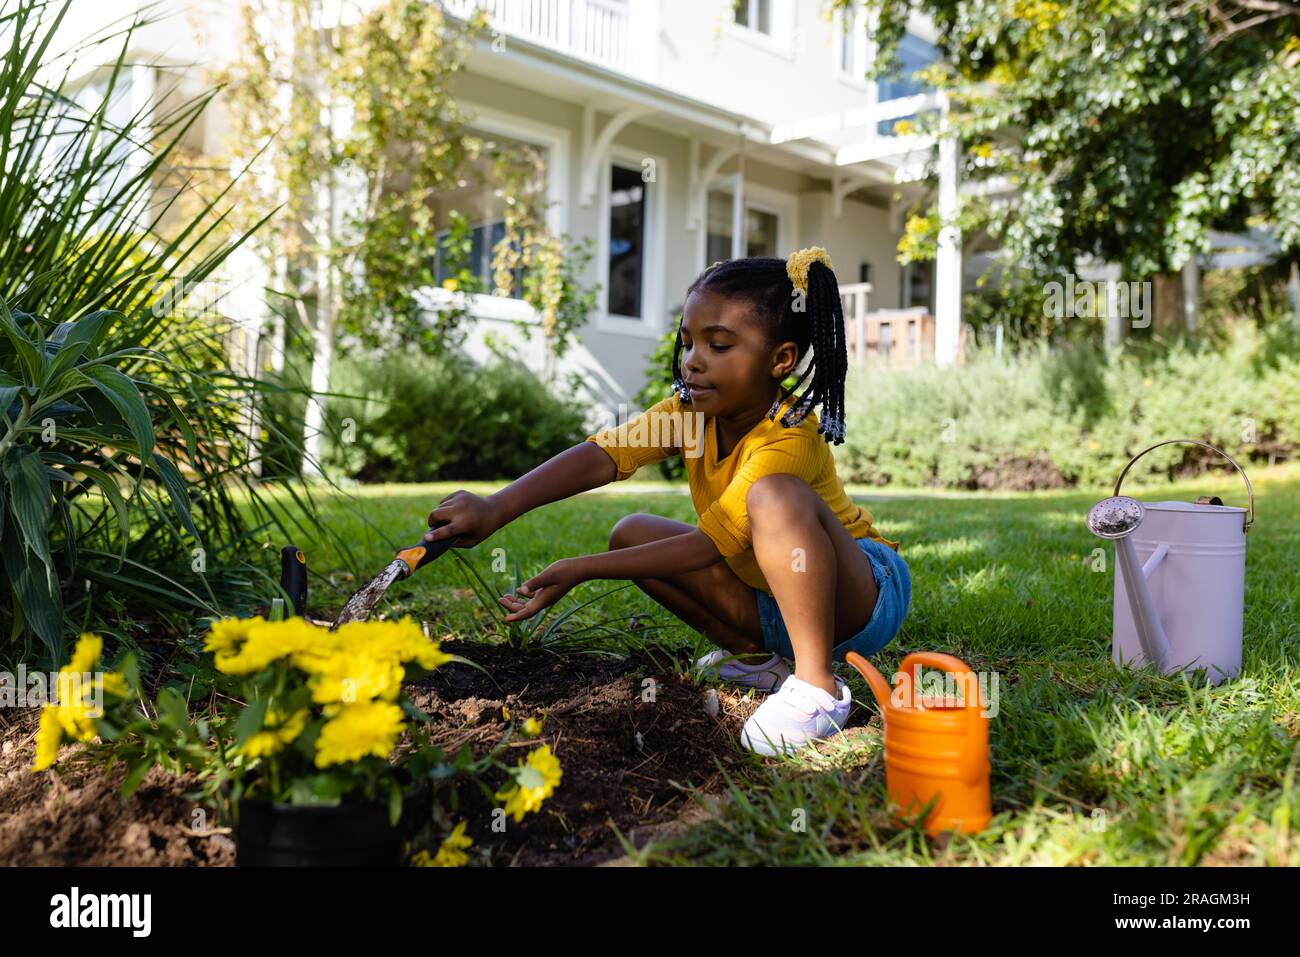 African american girl digging dirt with tool on grassy land in yard outside house Stock Photo